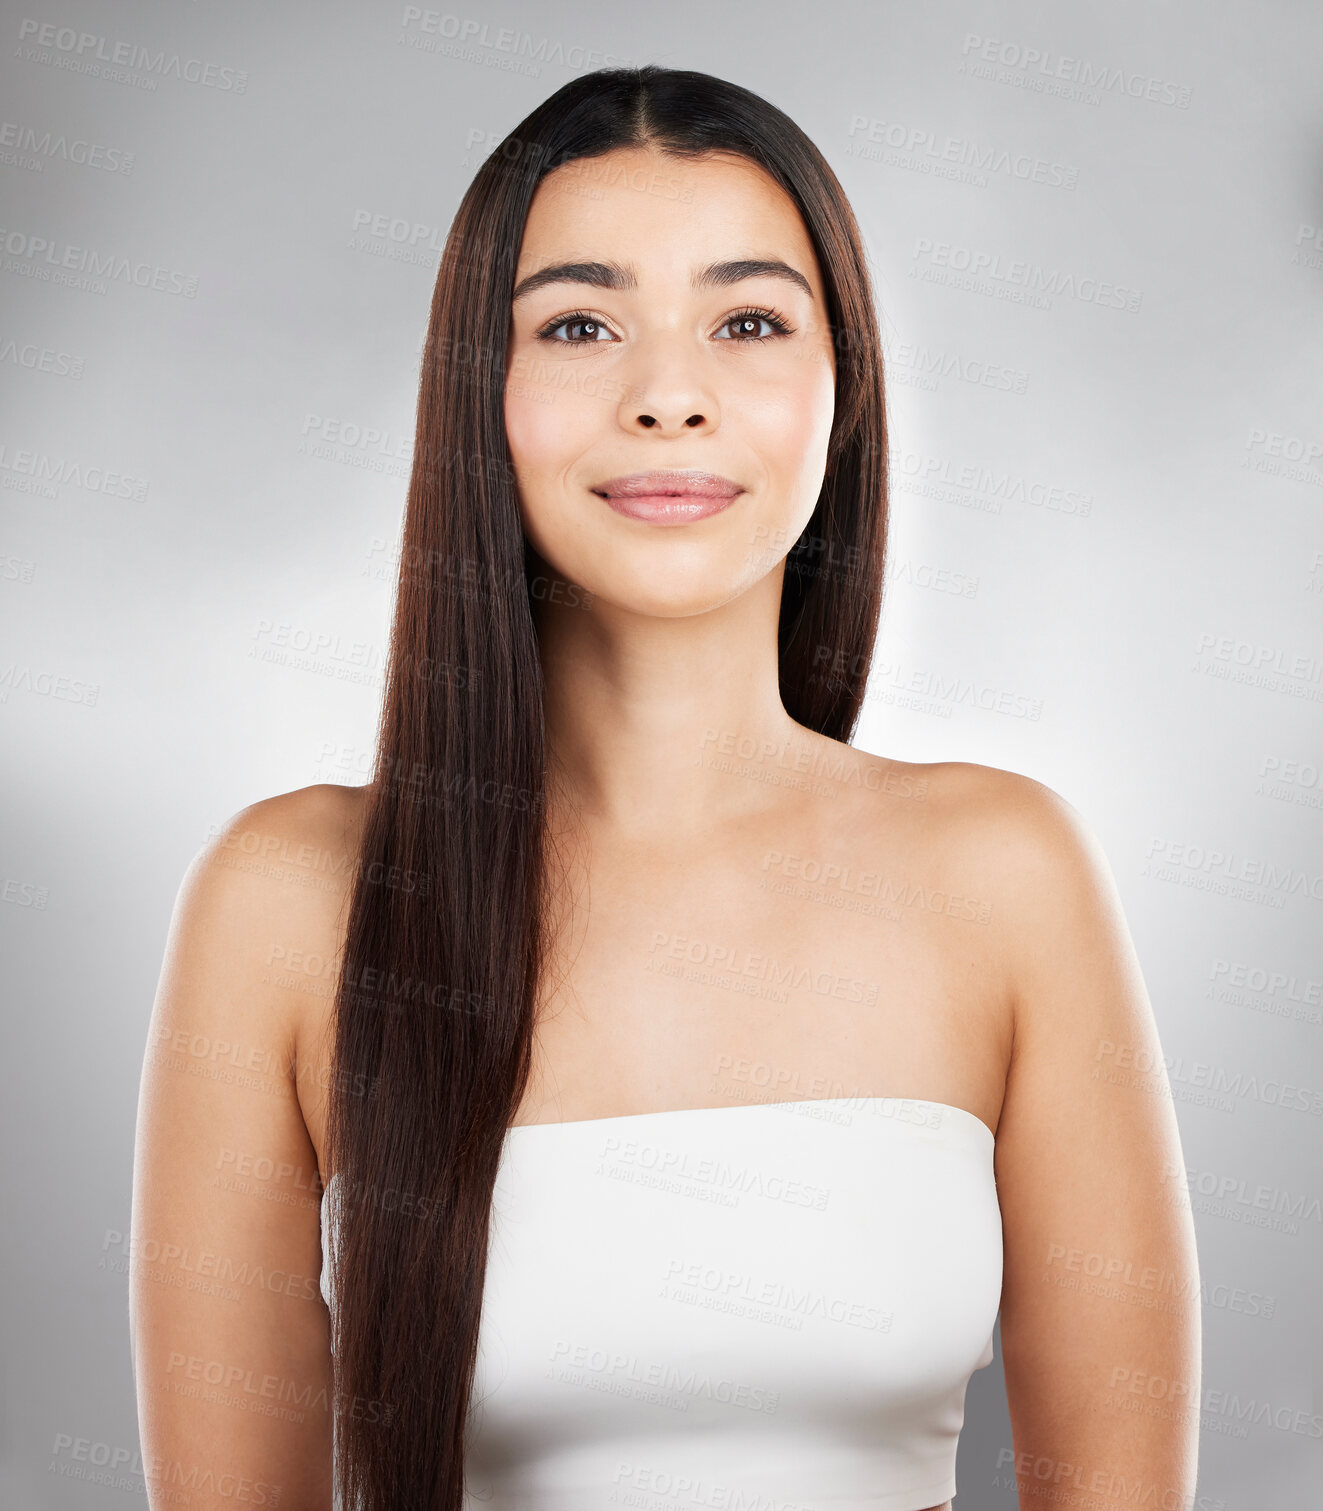 Buy stock photo Studio portrait of a beautiful young woman showing off her long silky hair against a grey background